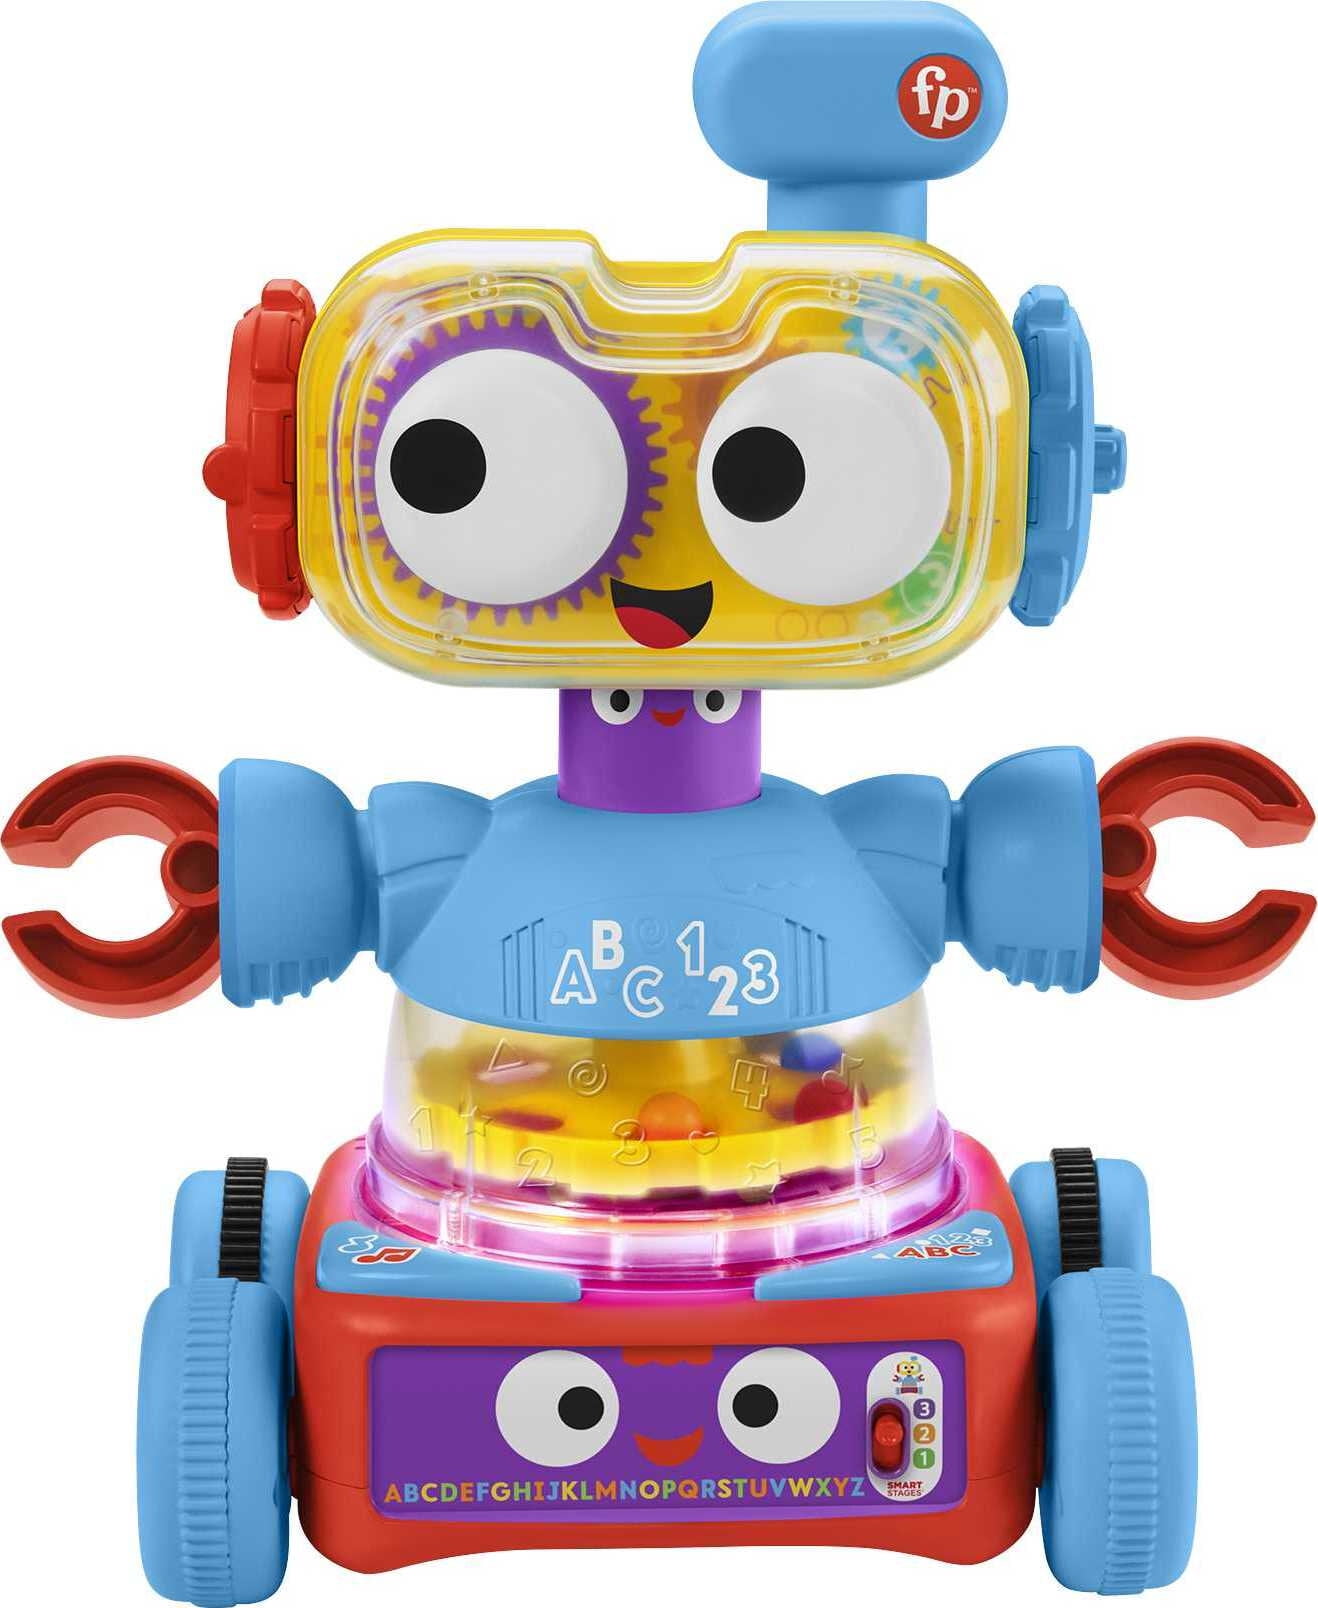 Musical Model Robot Kids Interactive Education Toy Kids Play Toys Birthday Gift 